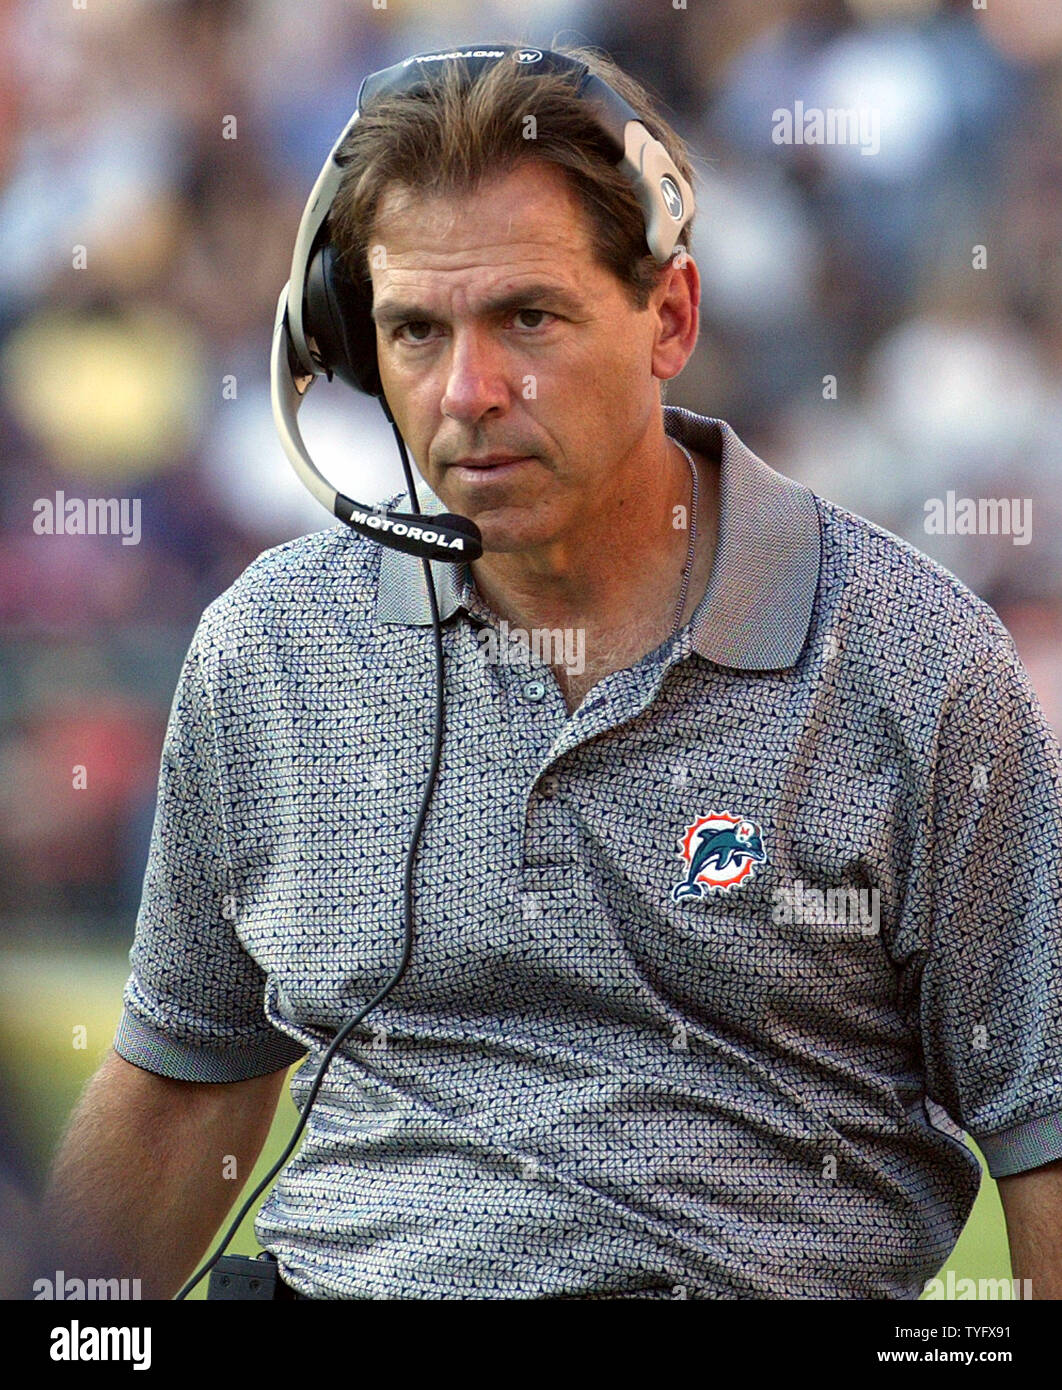 Miami Dolphins head coach Nick Saban returns to LSU's Tiger Stadium in  Baton Rouge, Louisiana, October 30, 2005, in action against the New Orleans  Saints. Saban was the head coach at LSU